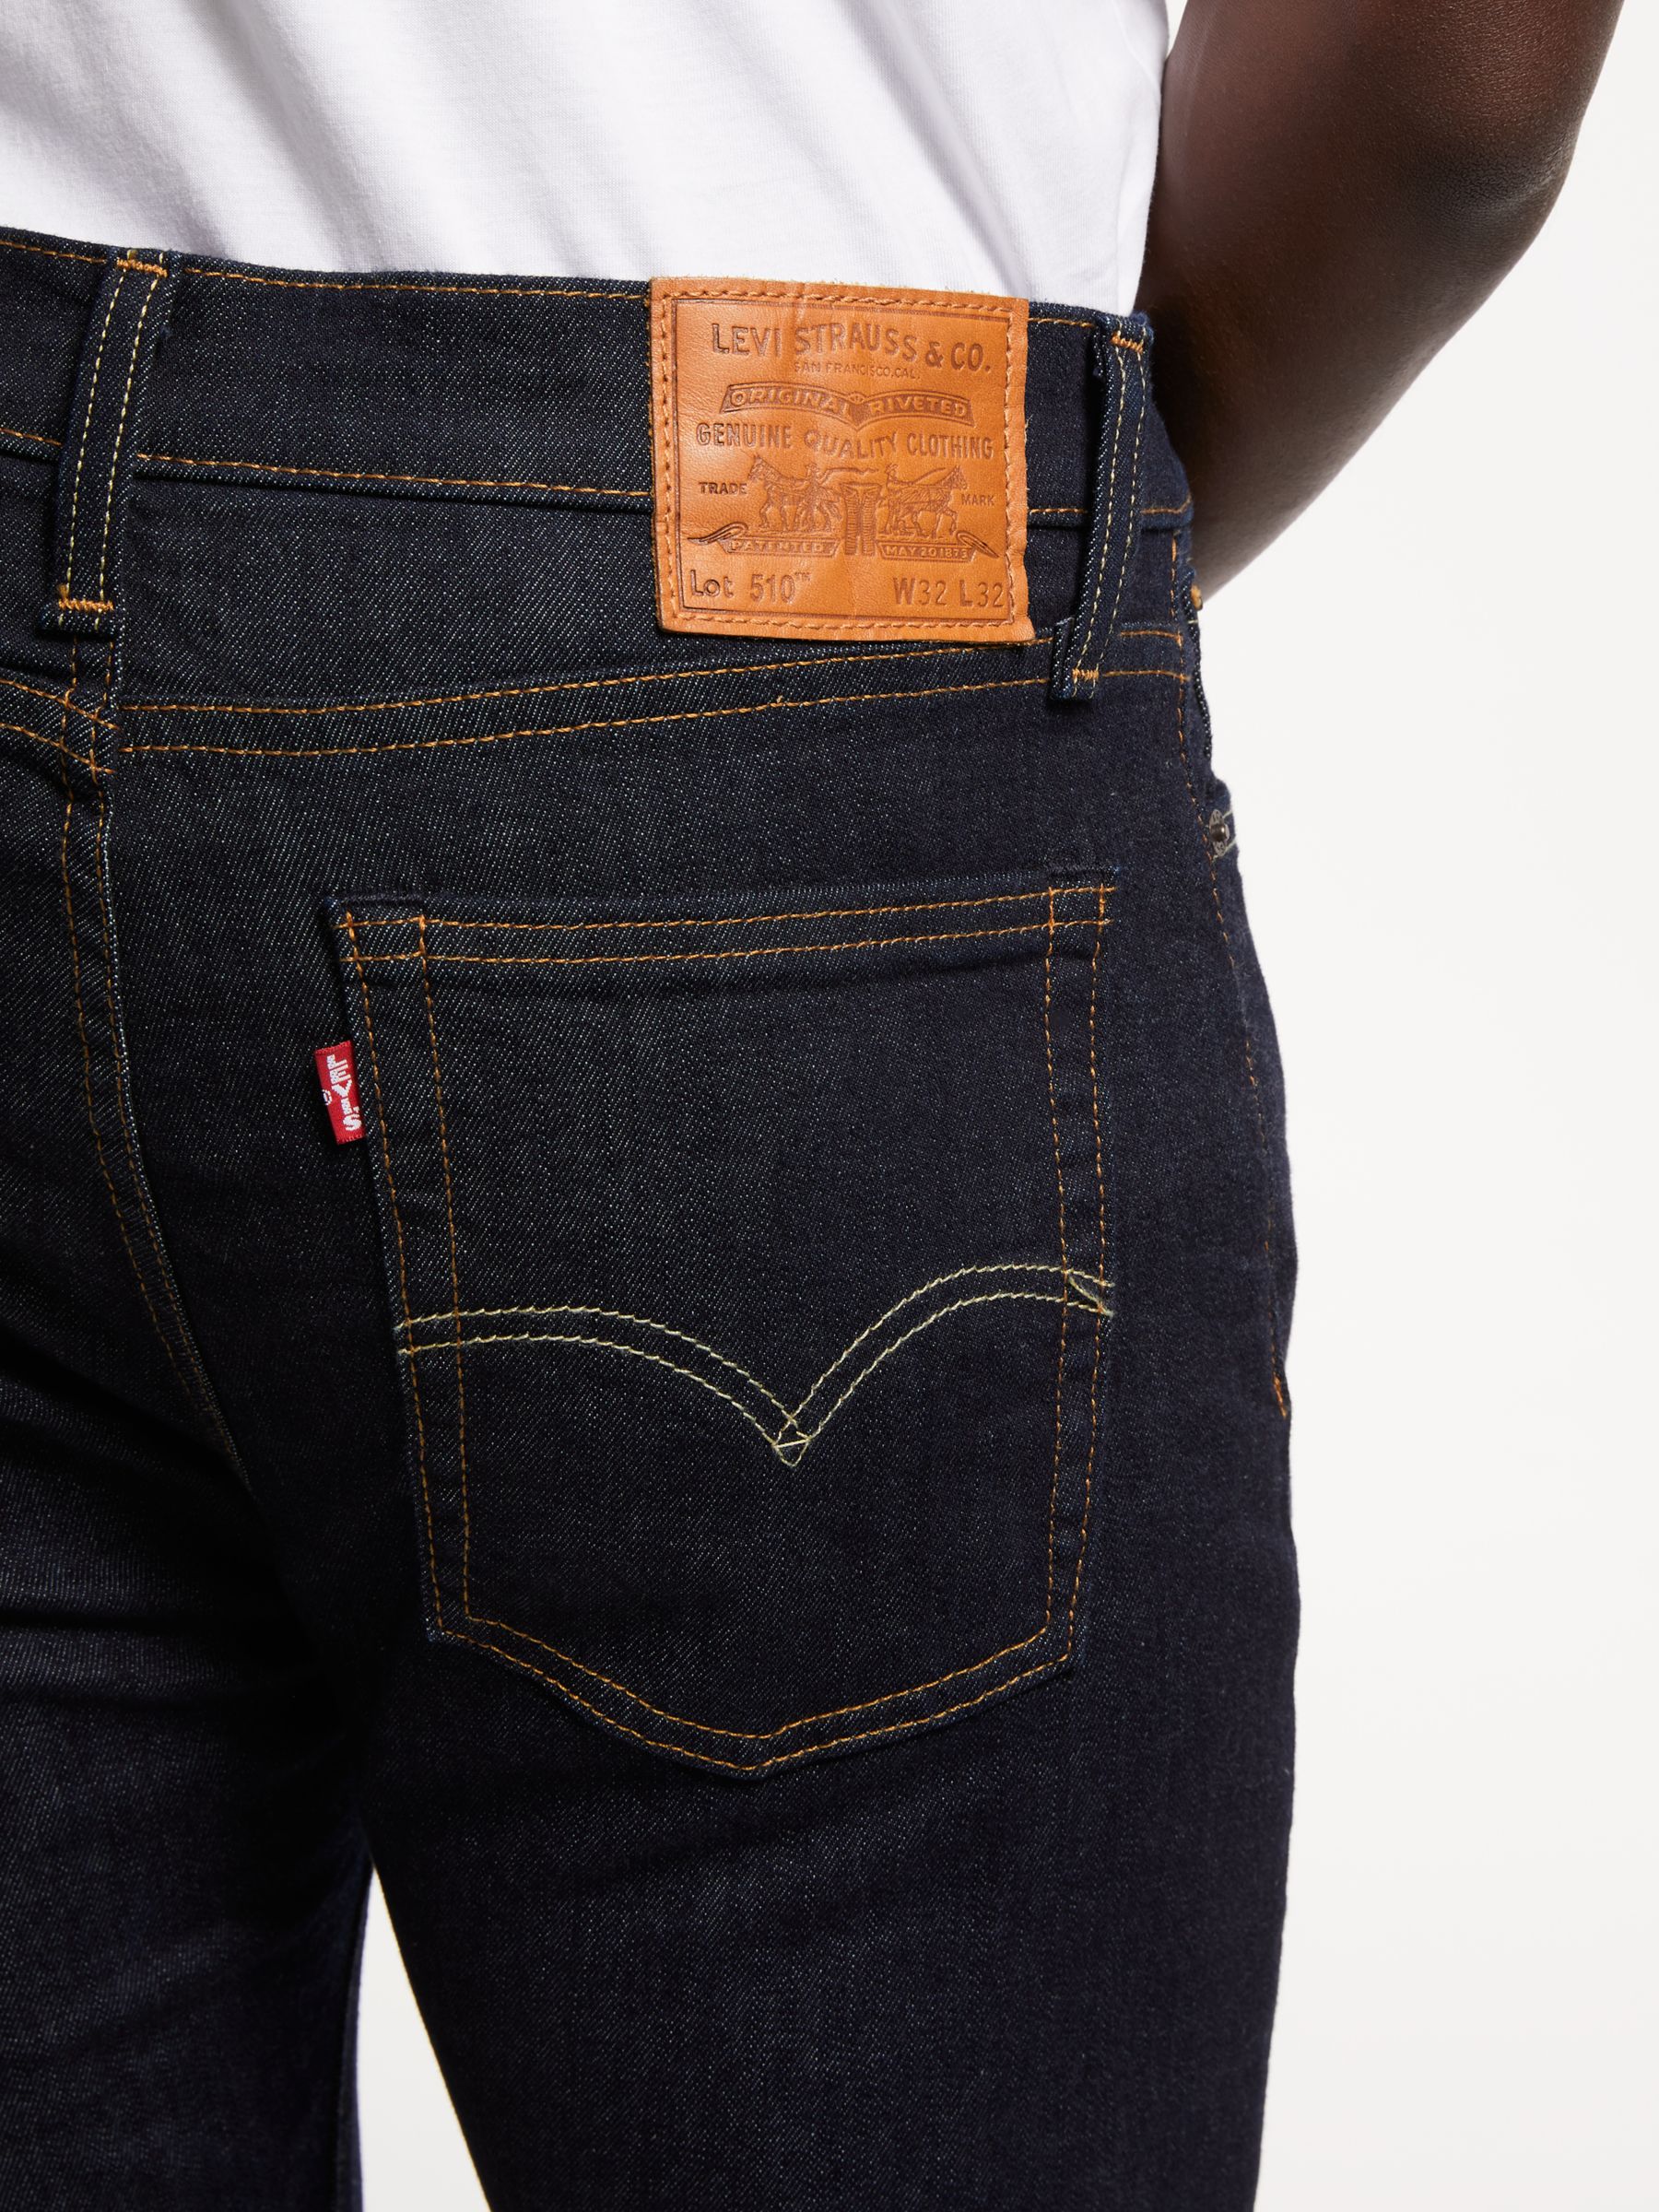 levis 510 cleaner adv